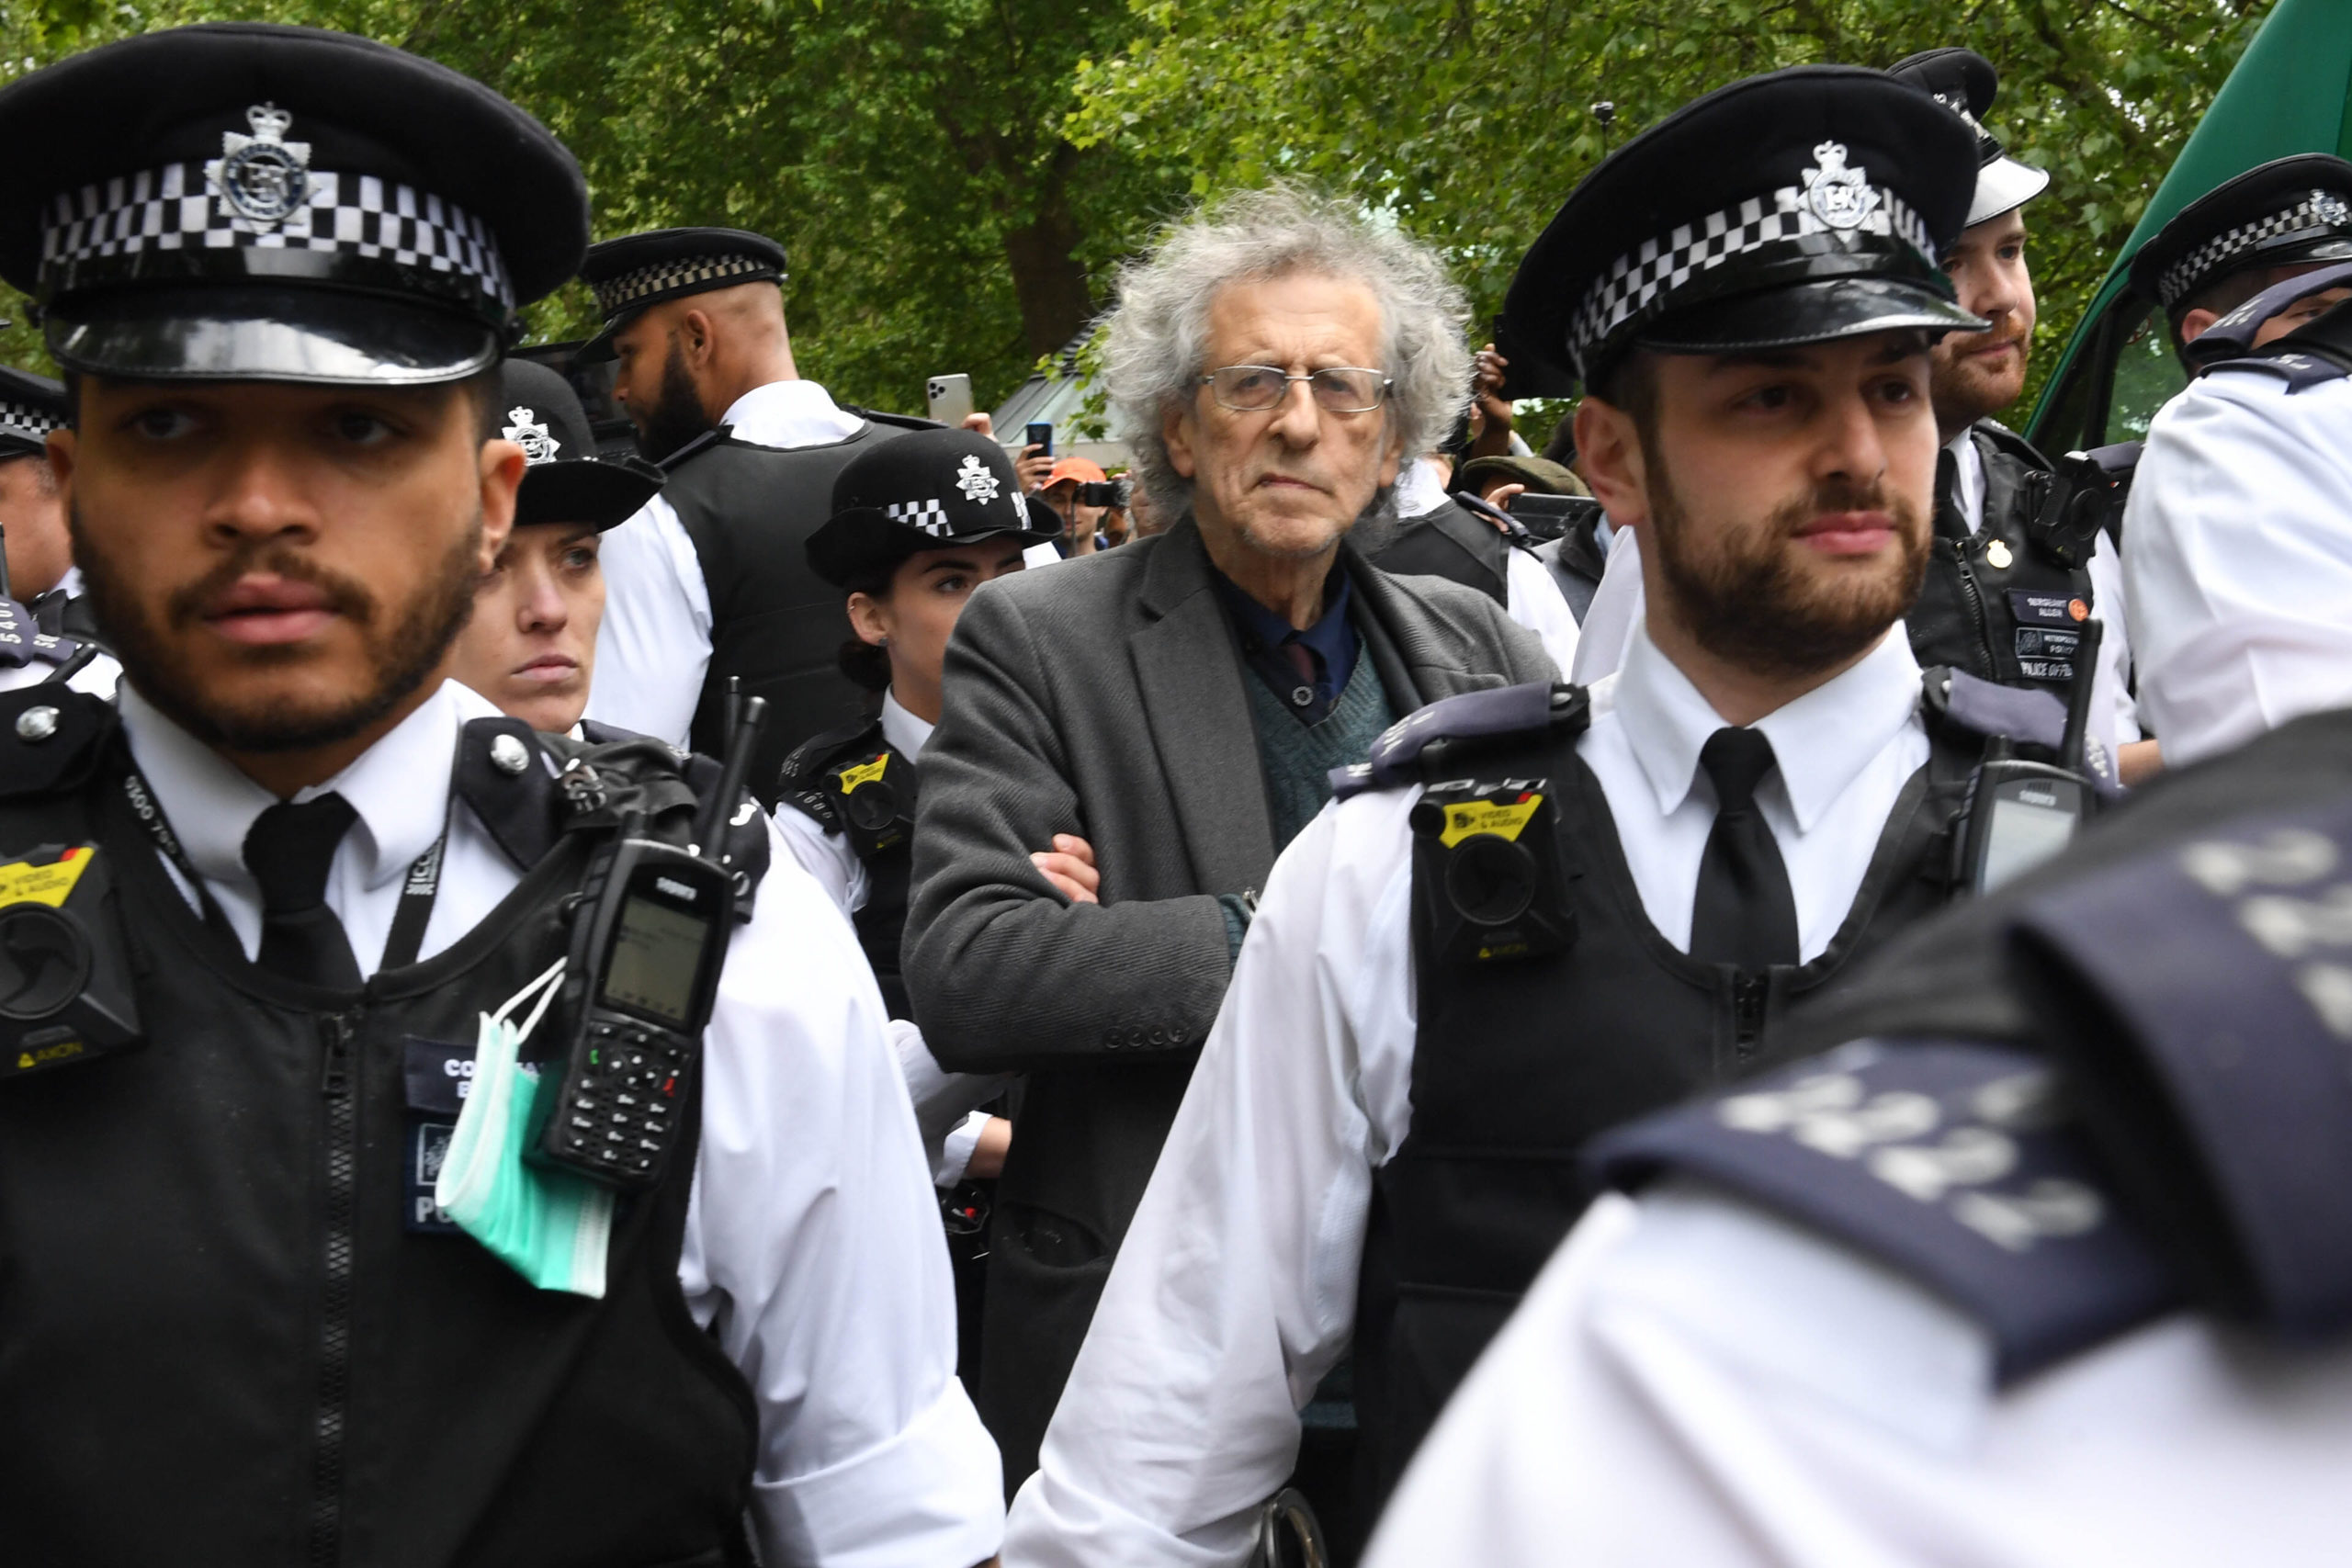 Piers Corbyn is led away by police after a protest against lockdown at Hyde Park, London yesterday